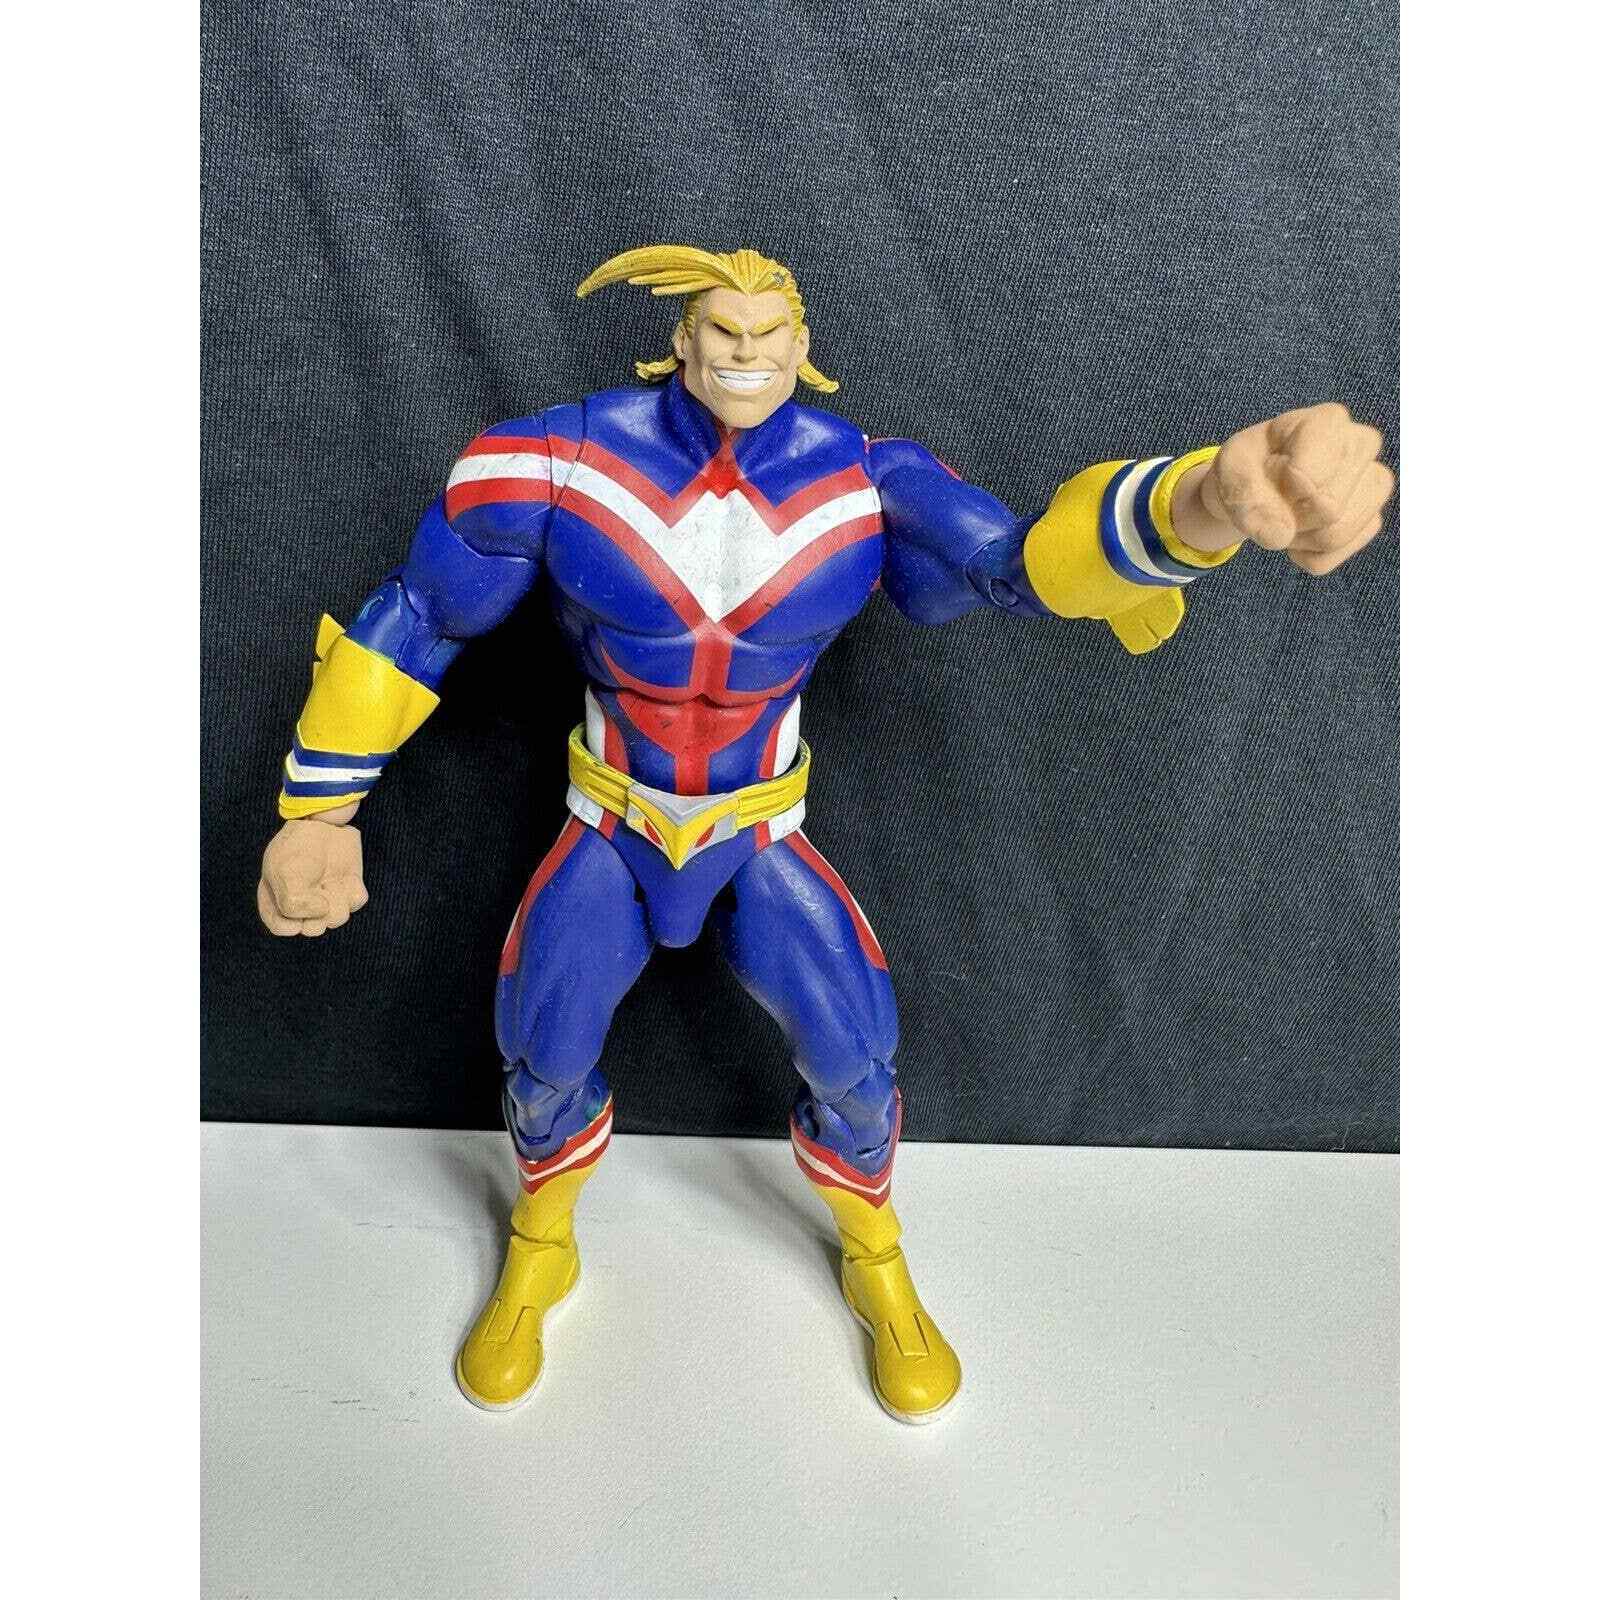 Primary image for All Might 7" Action Figure My Hero Academia McFarlane loose